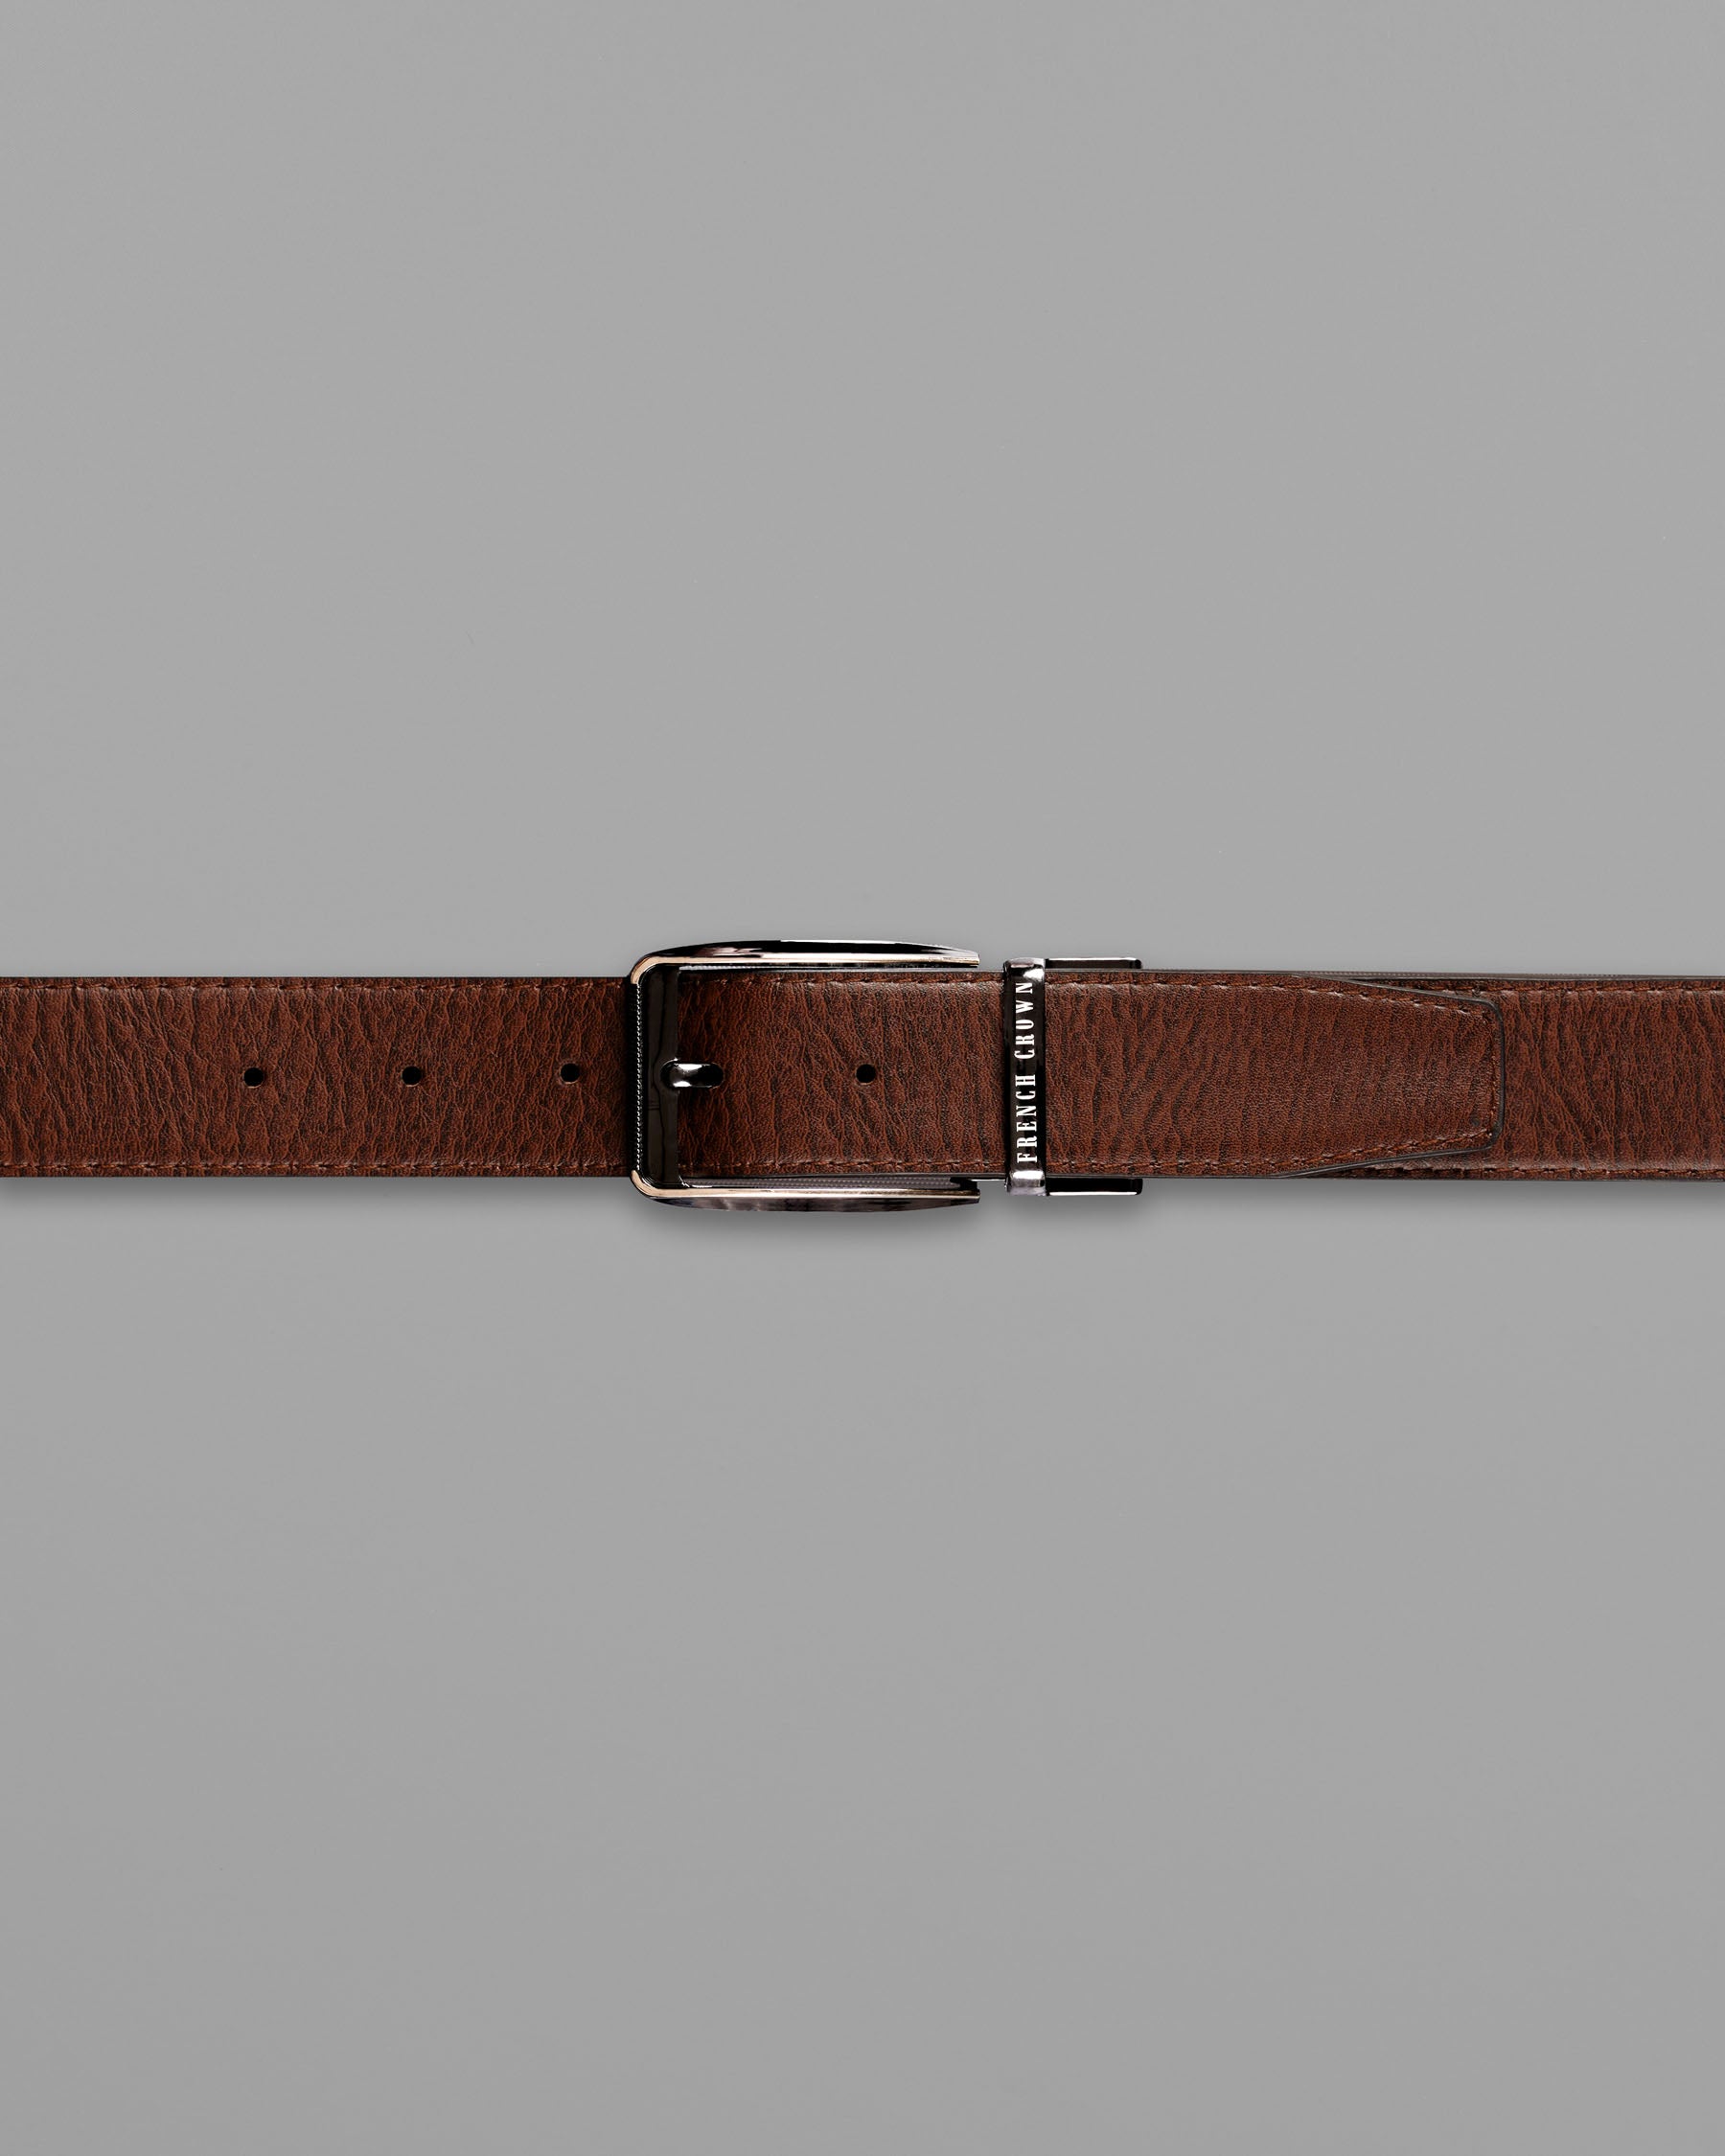 Glossy Grey with golden Patterned buckle Reversible Black and Brown Vegan Leather Handcrafted Belt